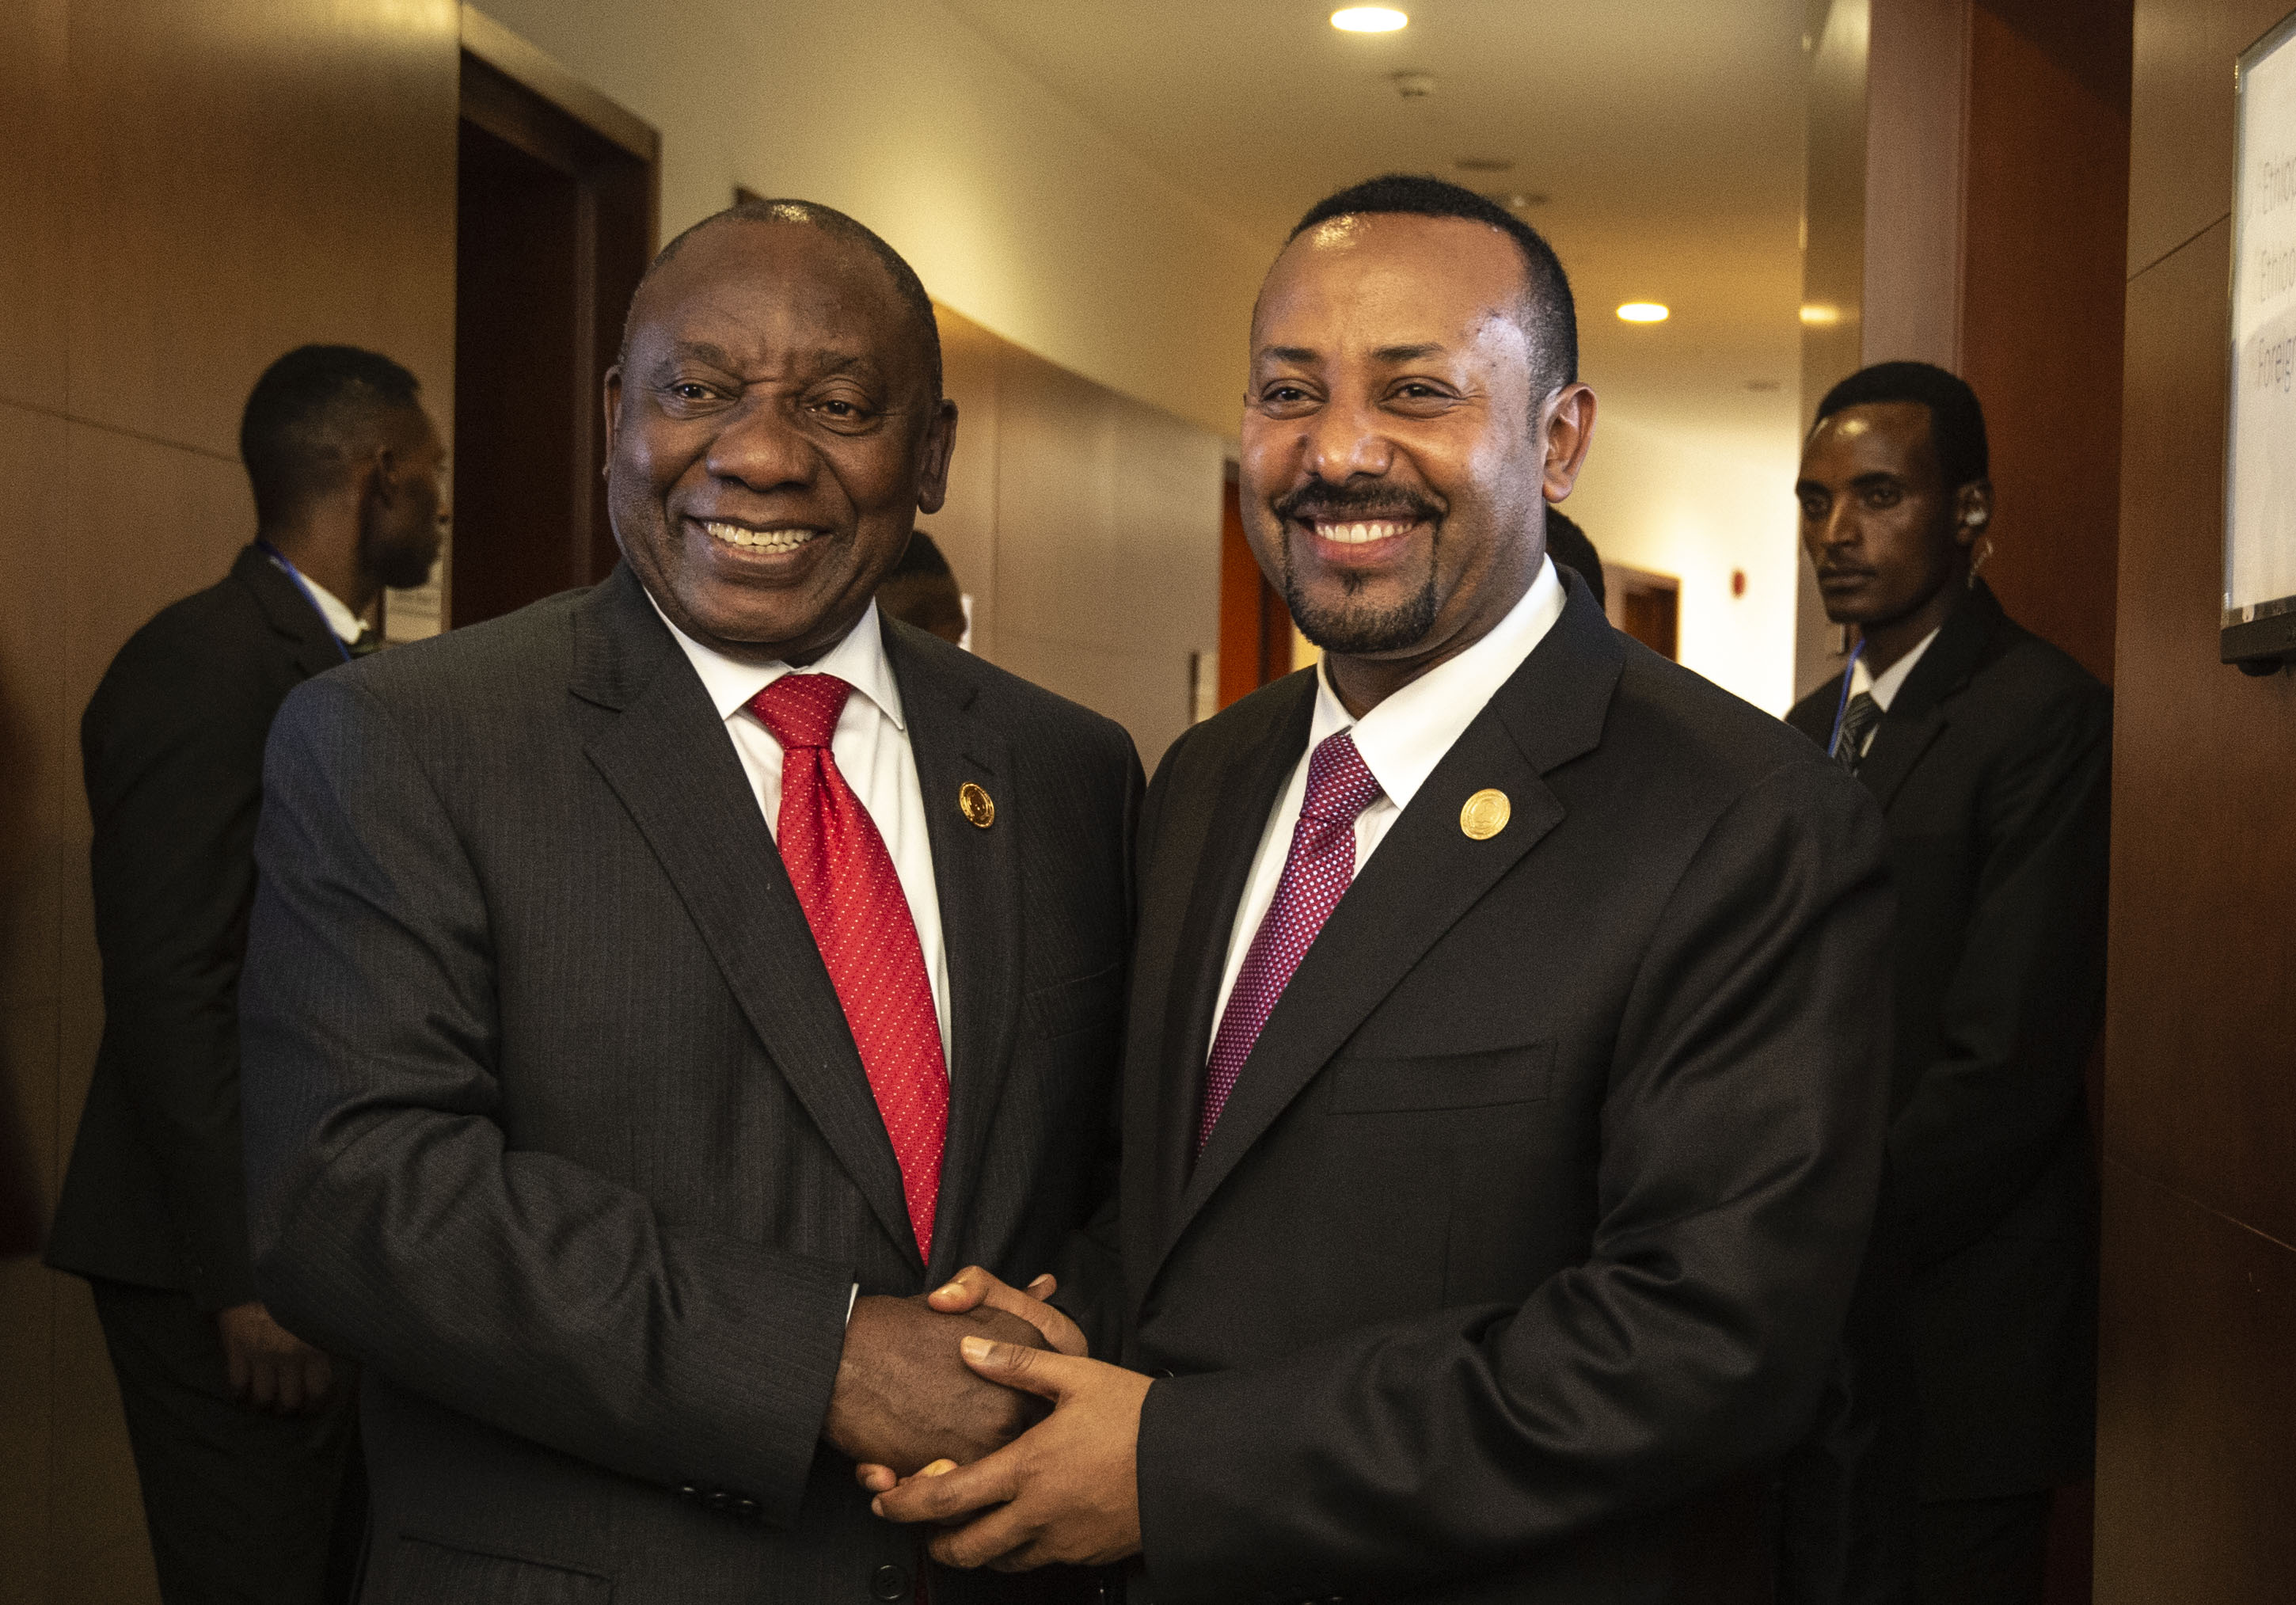 Prime Minister Abiy Ahmed of Ethiopia (photo credit: GovernmentZA/flickr)